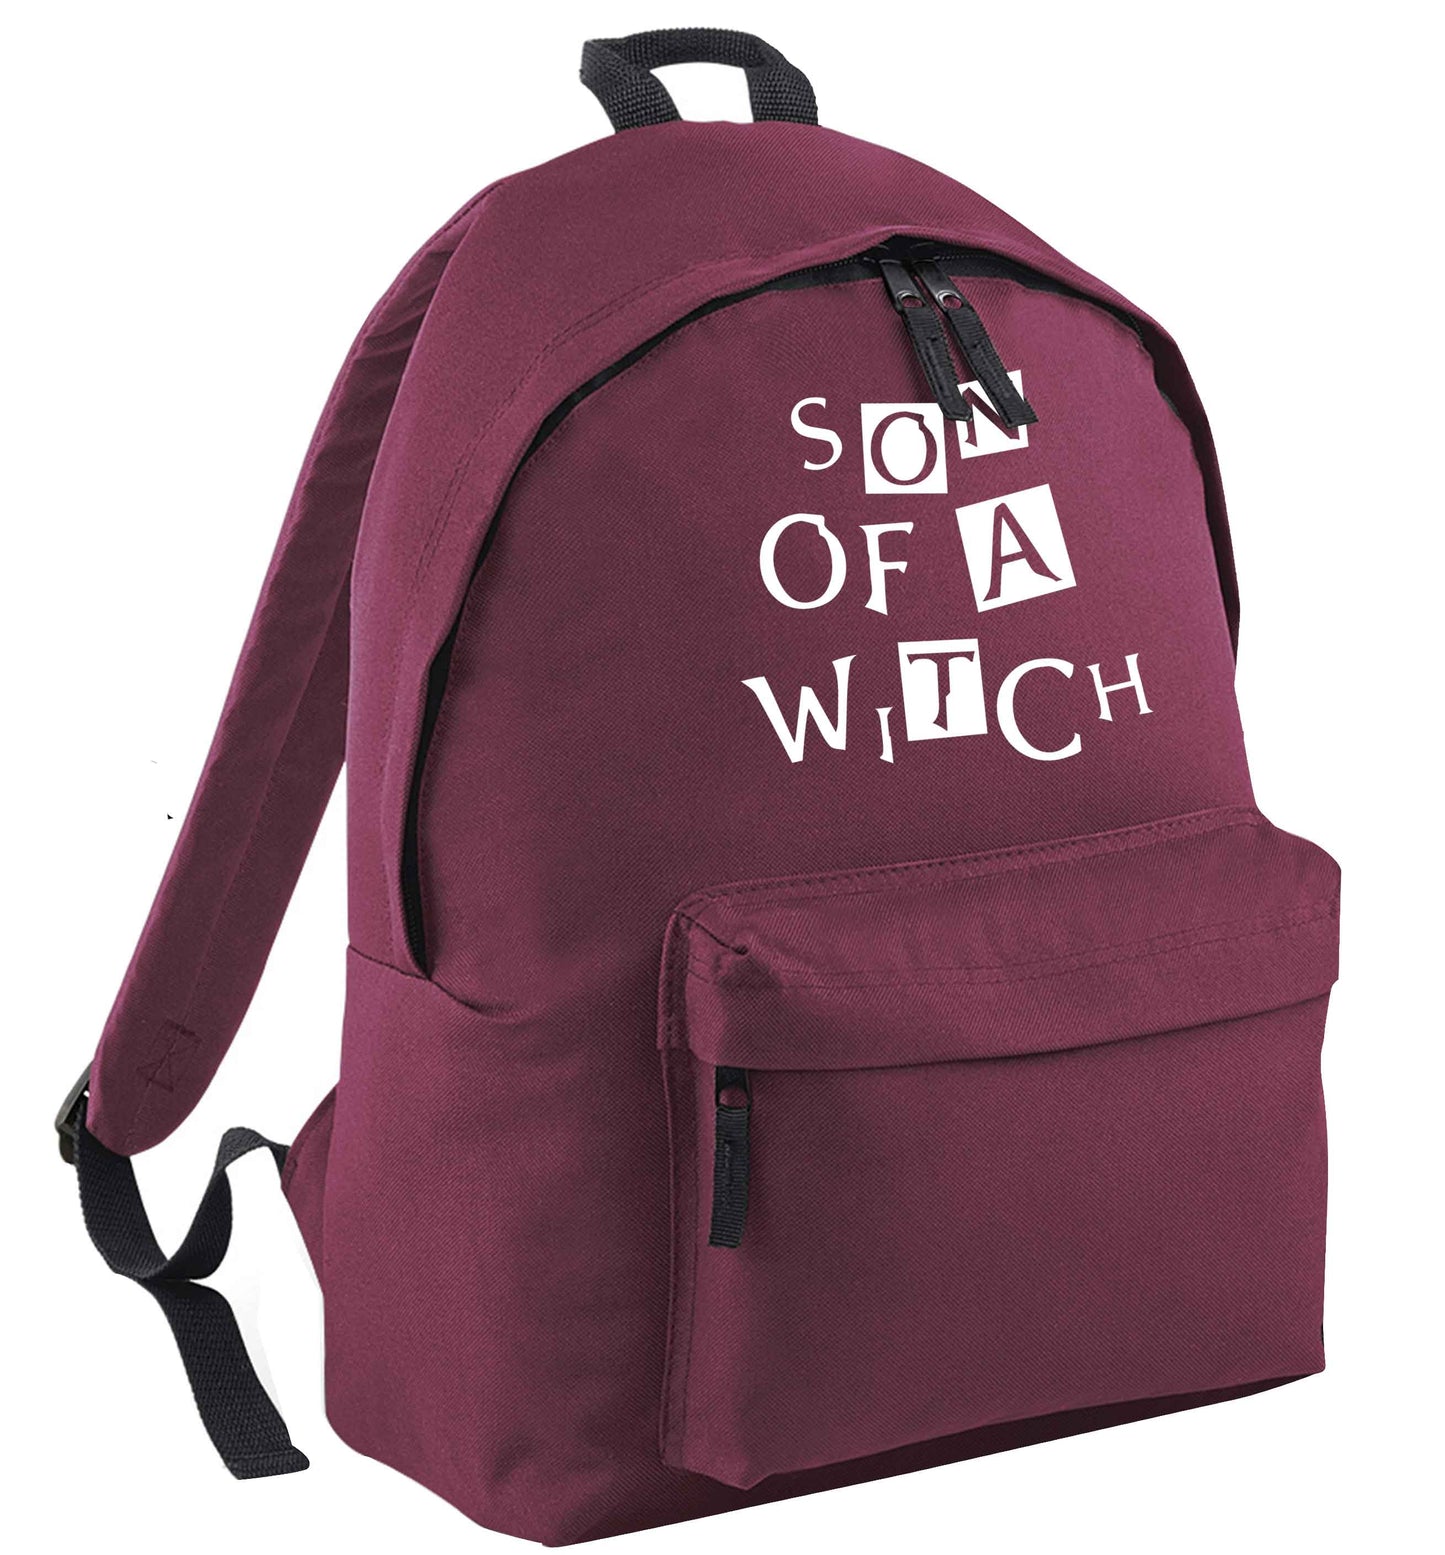 Son of a witch maroon adults backpack